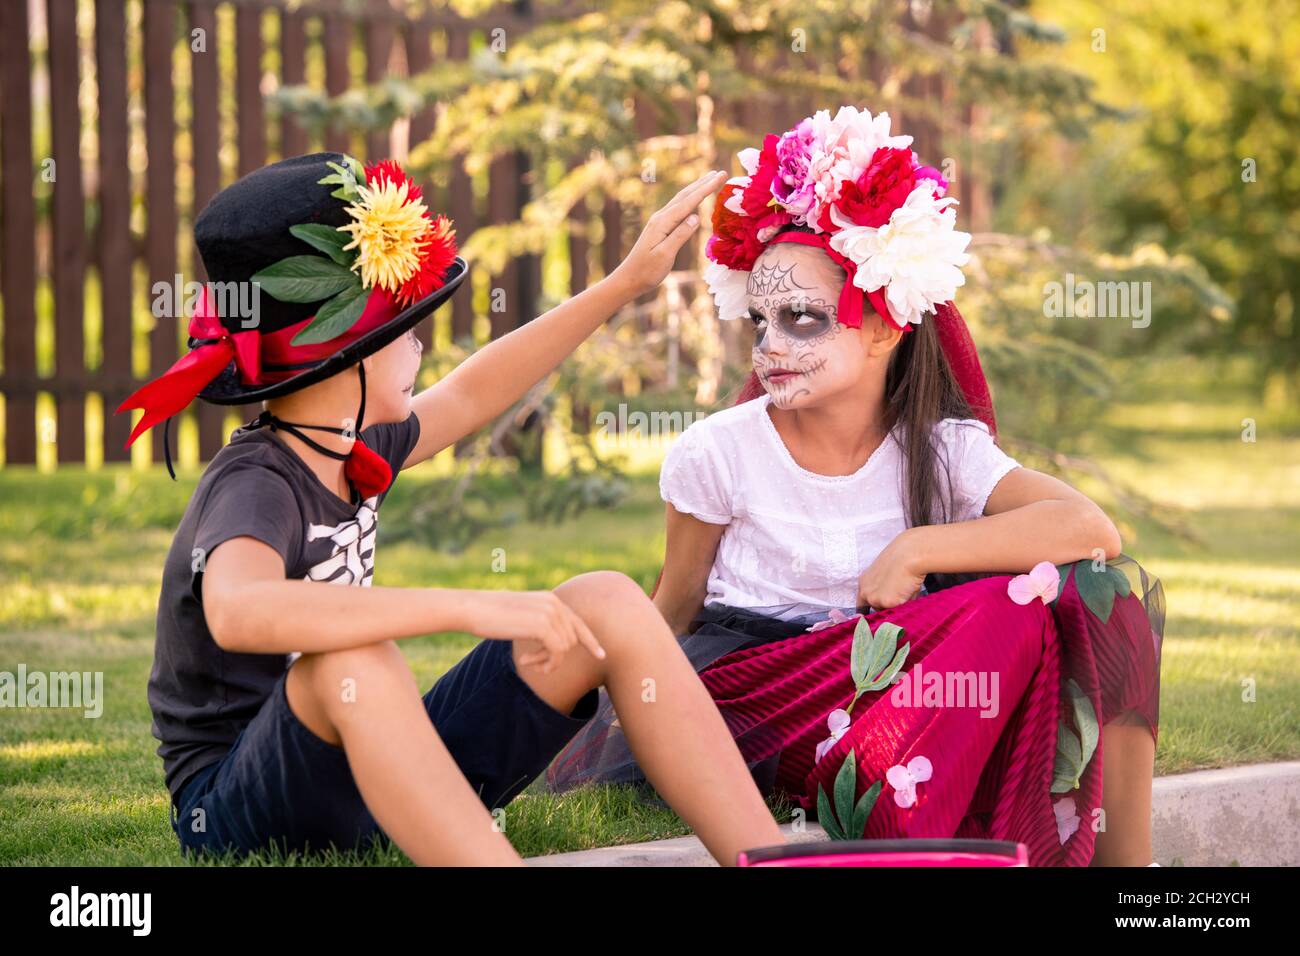 Cute boy in hat and t-shirt touching floral wreath on head of pretty girl Stock Photo